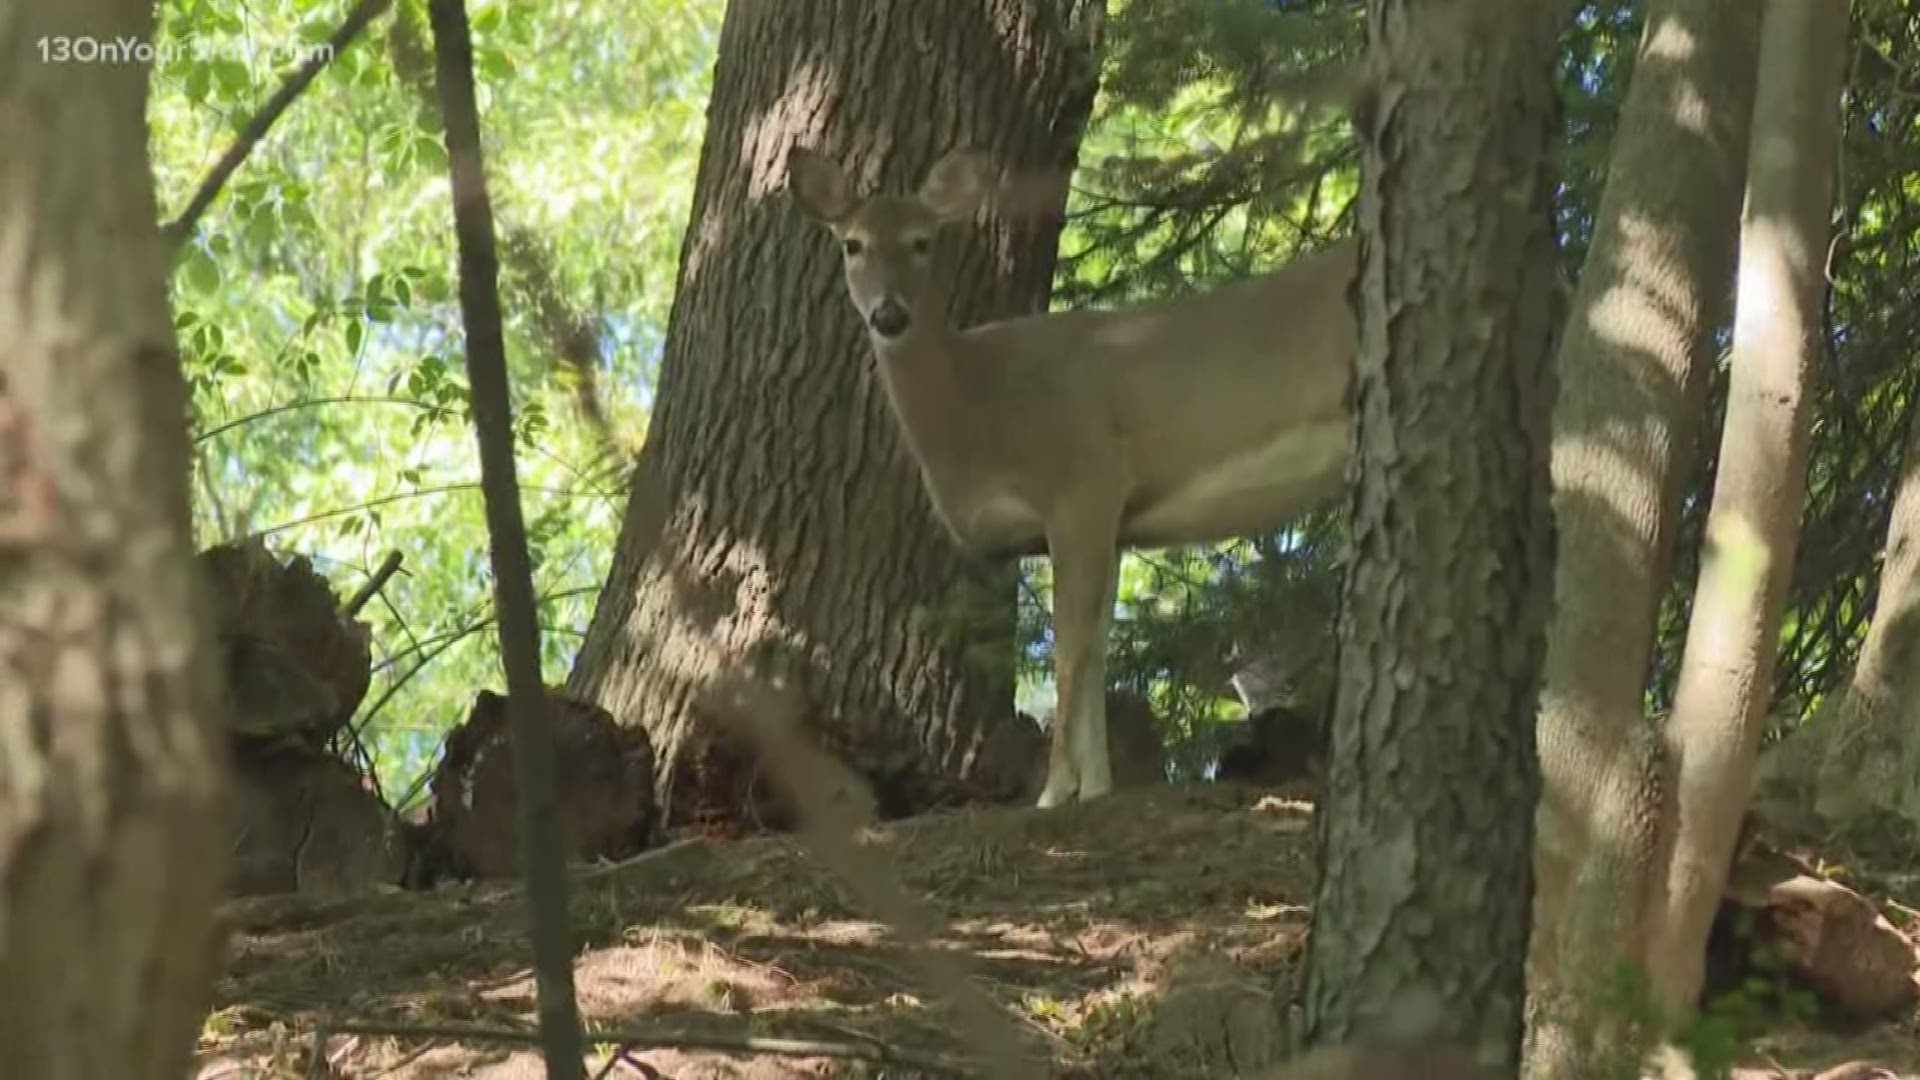 Muskegon is considering a deer cull to control the population.